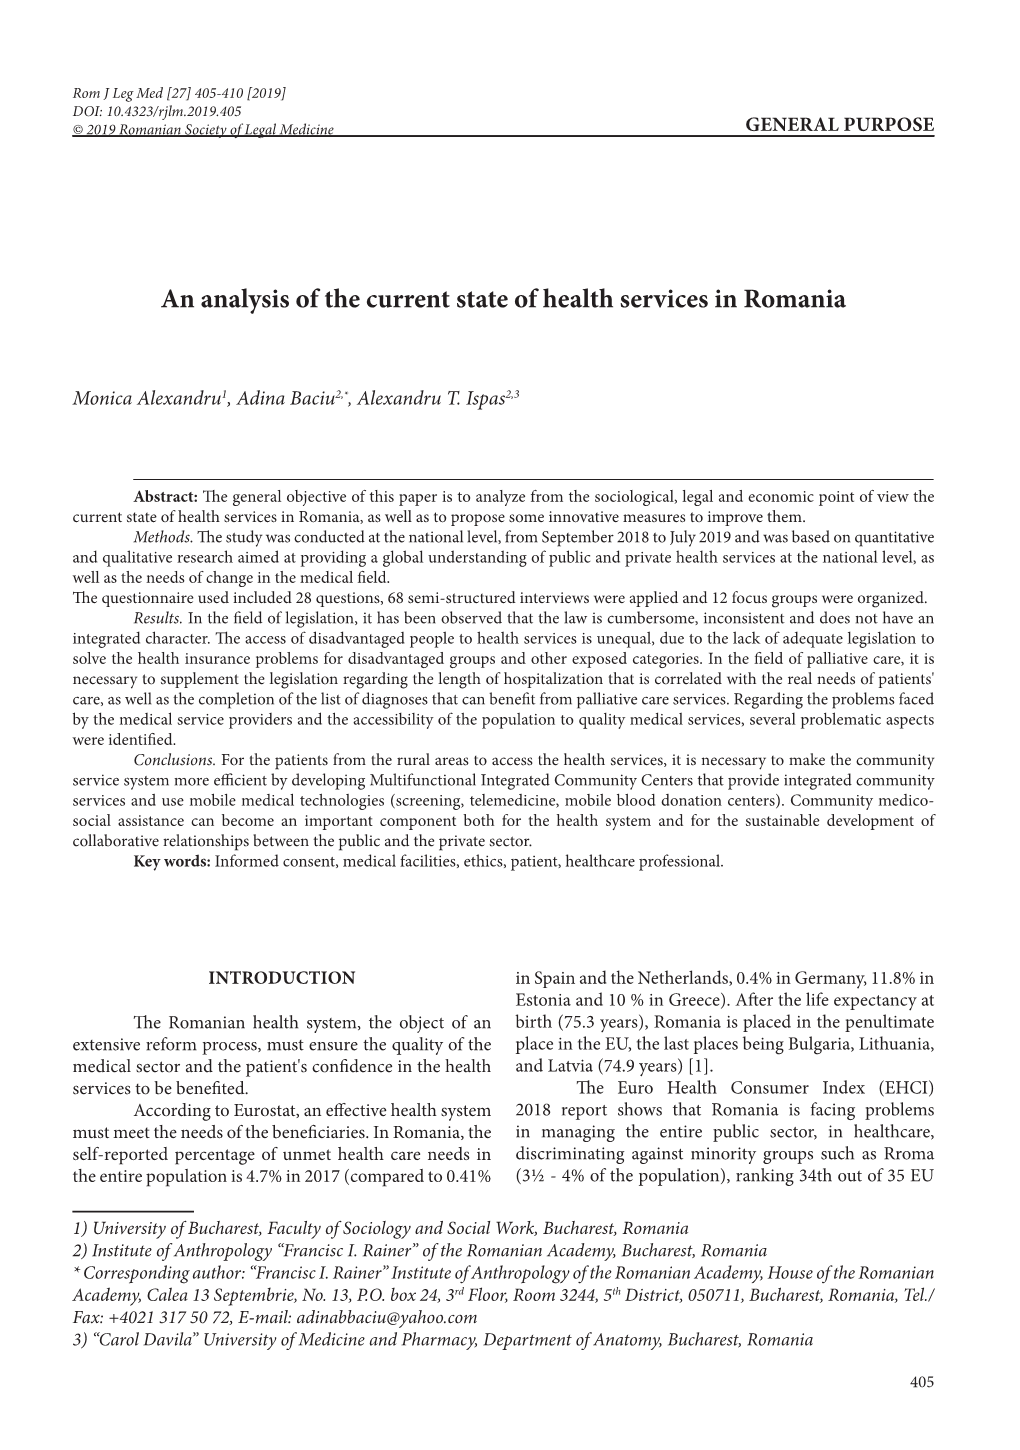 An Analysis of the Current State of Health Services in Romania